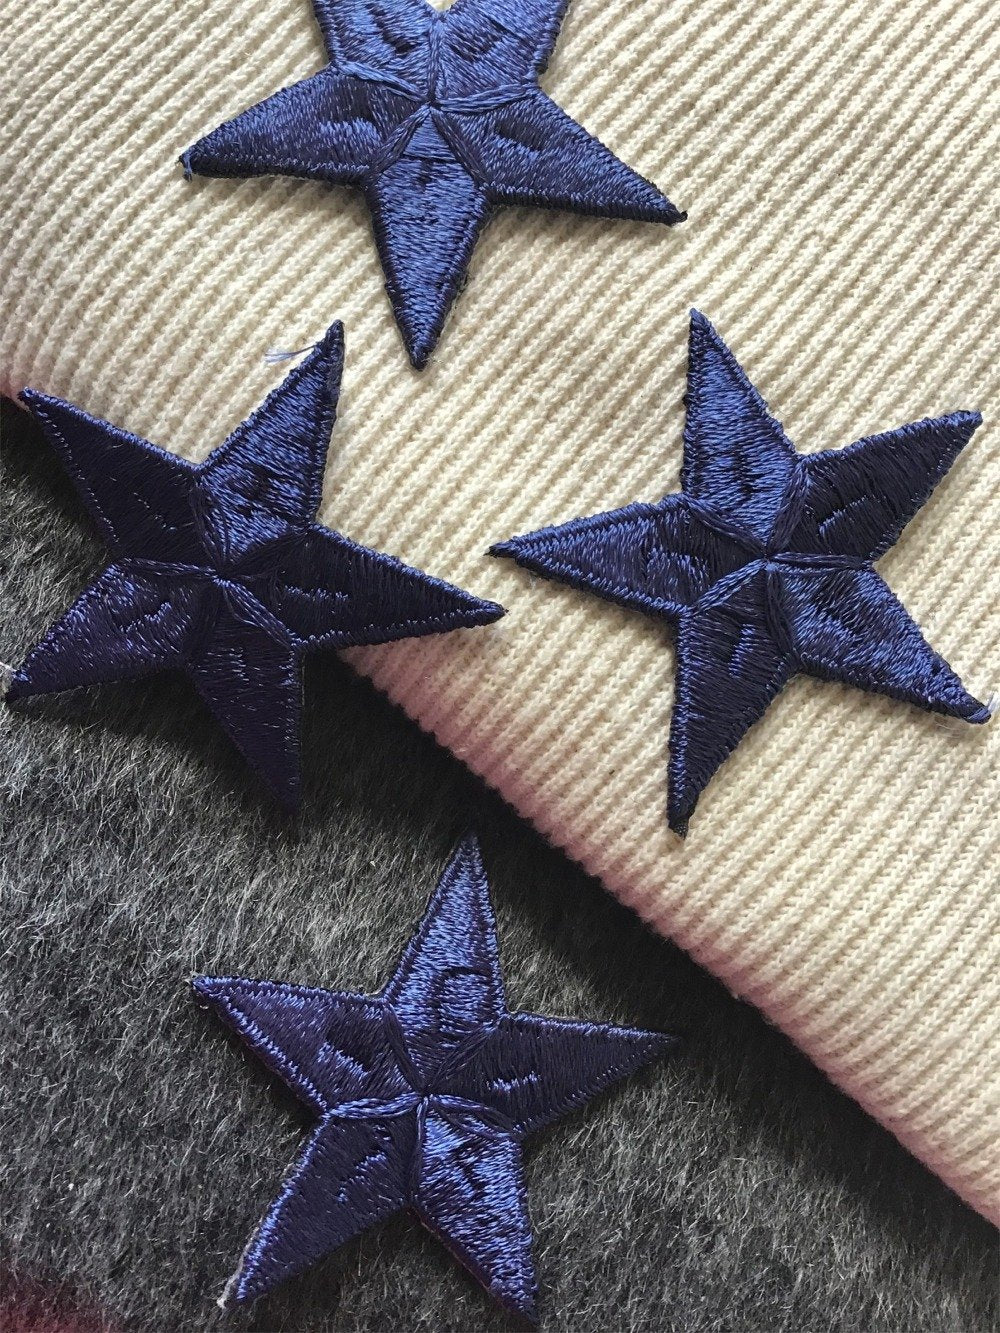 Vintage Embroidered Navy Star Decorative Patch #5017